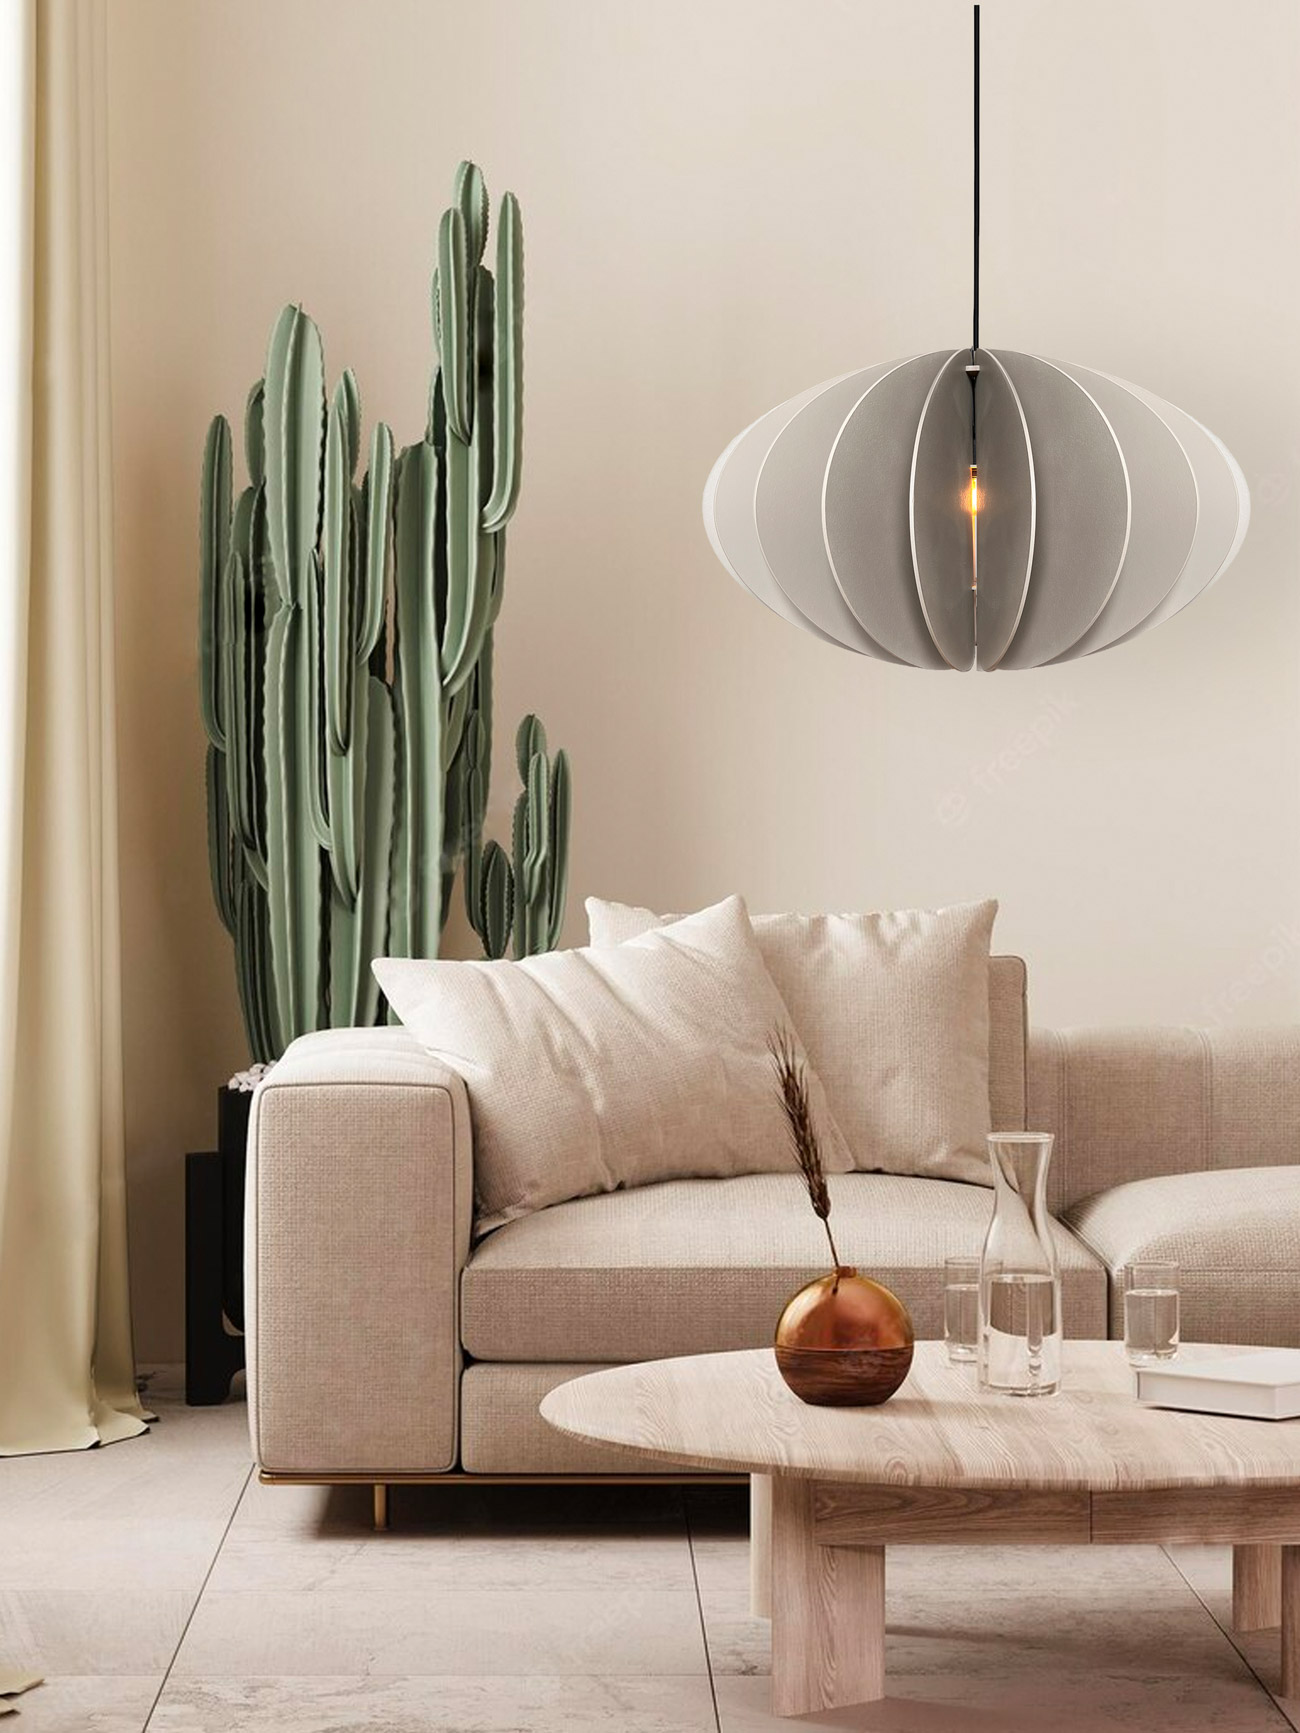 Stylish and modern lighting design for beige interior spaces, pendant lamp made from wood in the color beige